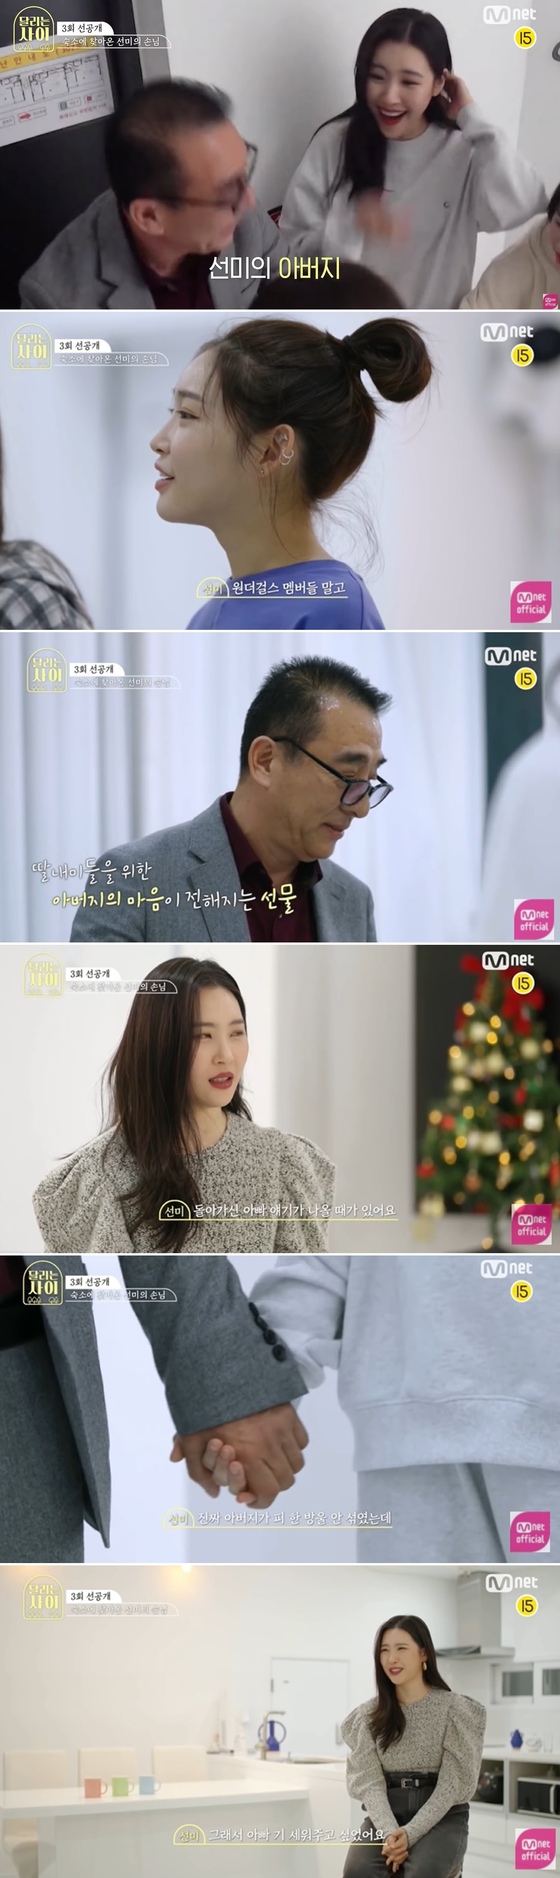 Sunmi “Sent all three brothers and sisters to the university of’Dad without a drop of blood'”